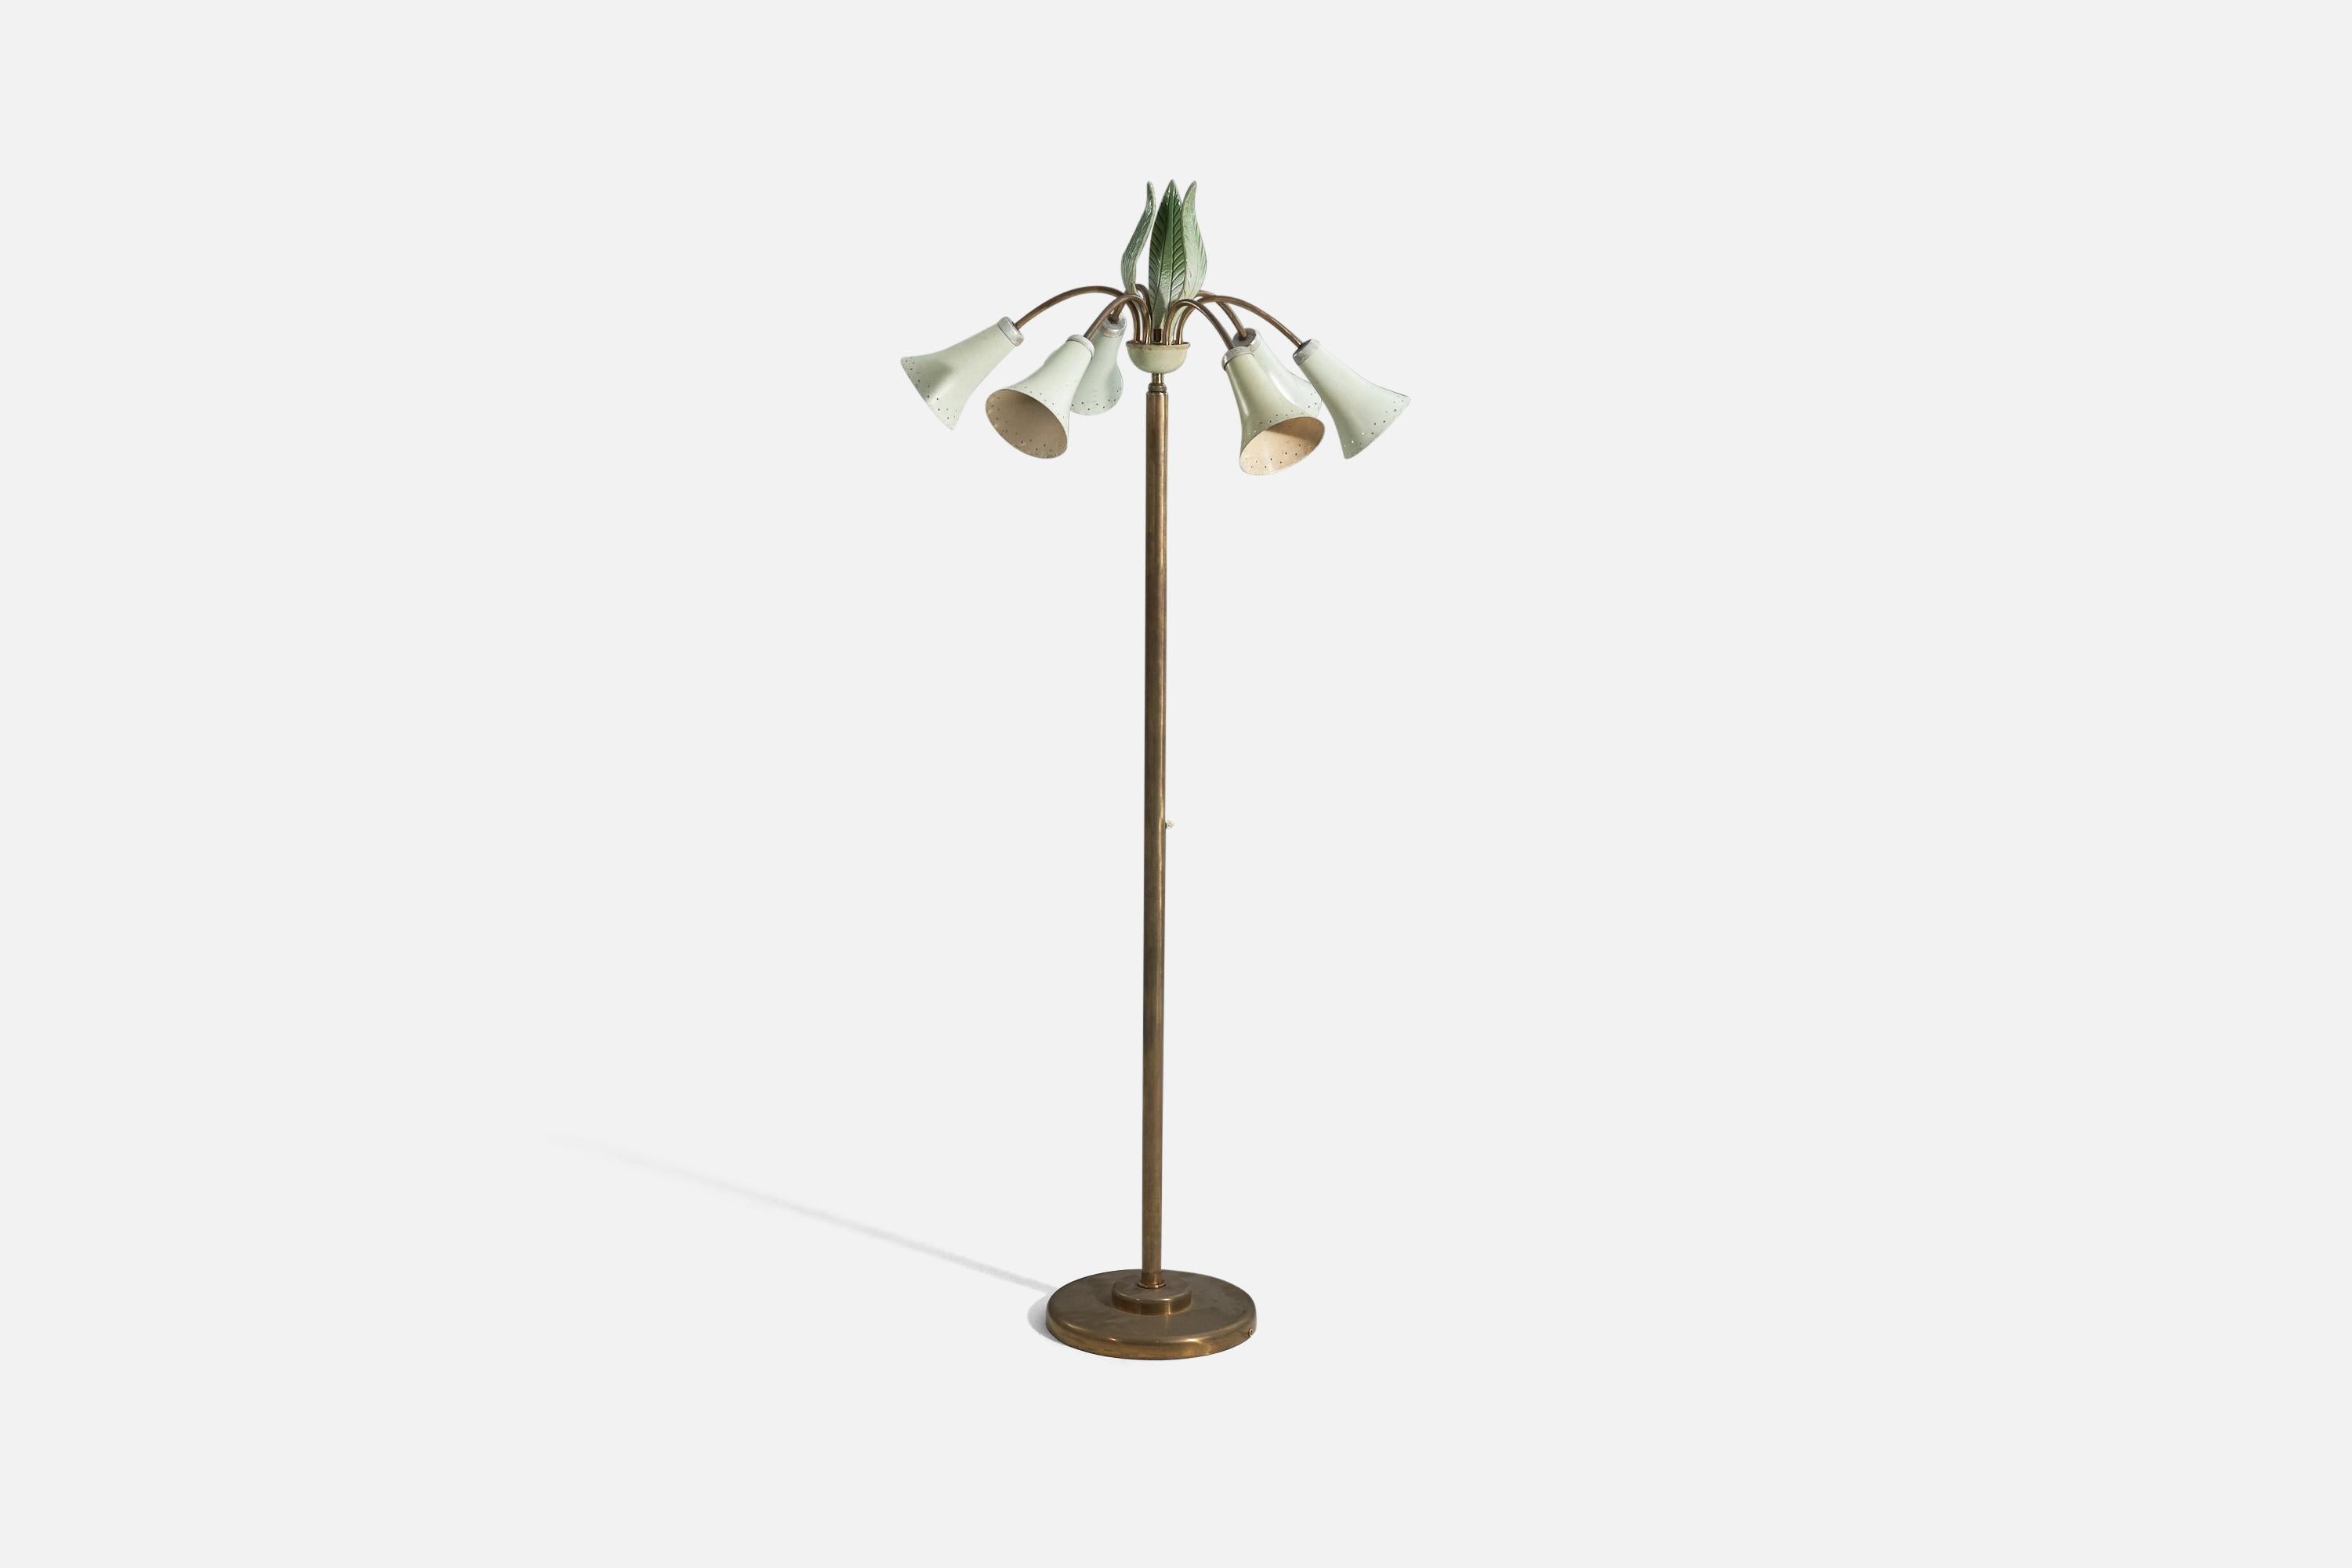 A brass, metal and iron floor lamp designed and produced in Italy, 1940s.

